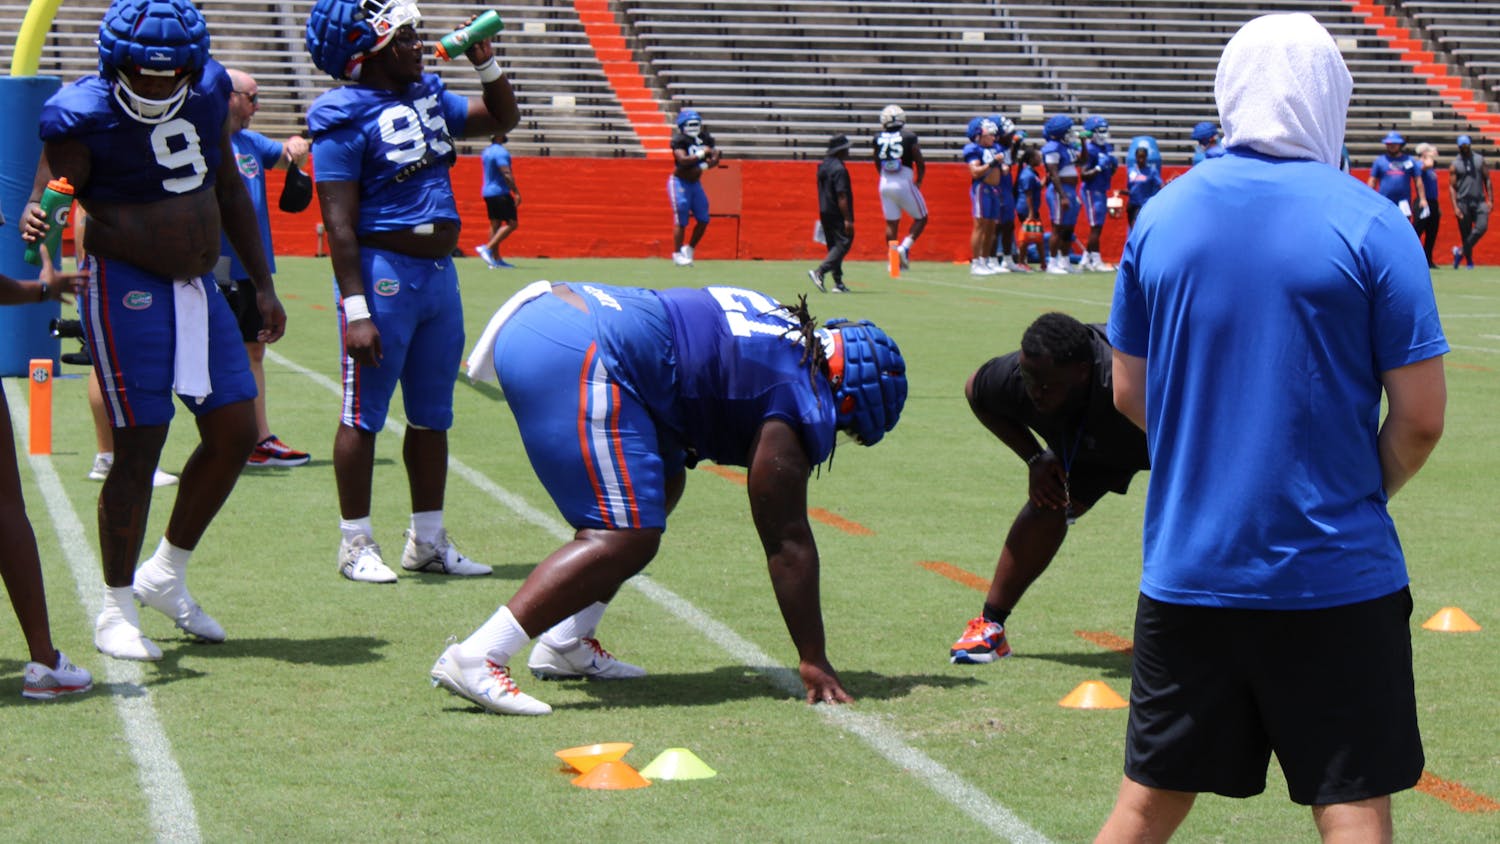 Junior defensive lineman Desmond Watson lines up for a drill in the Gators' Fall scrimmage Friday, Aug. 18.